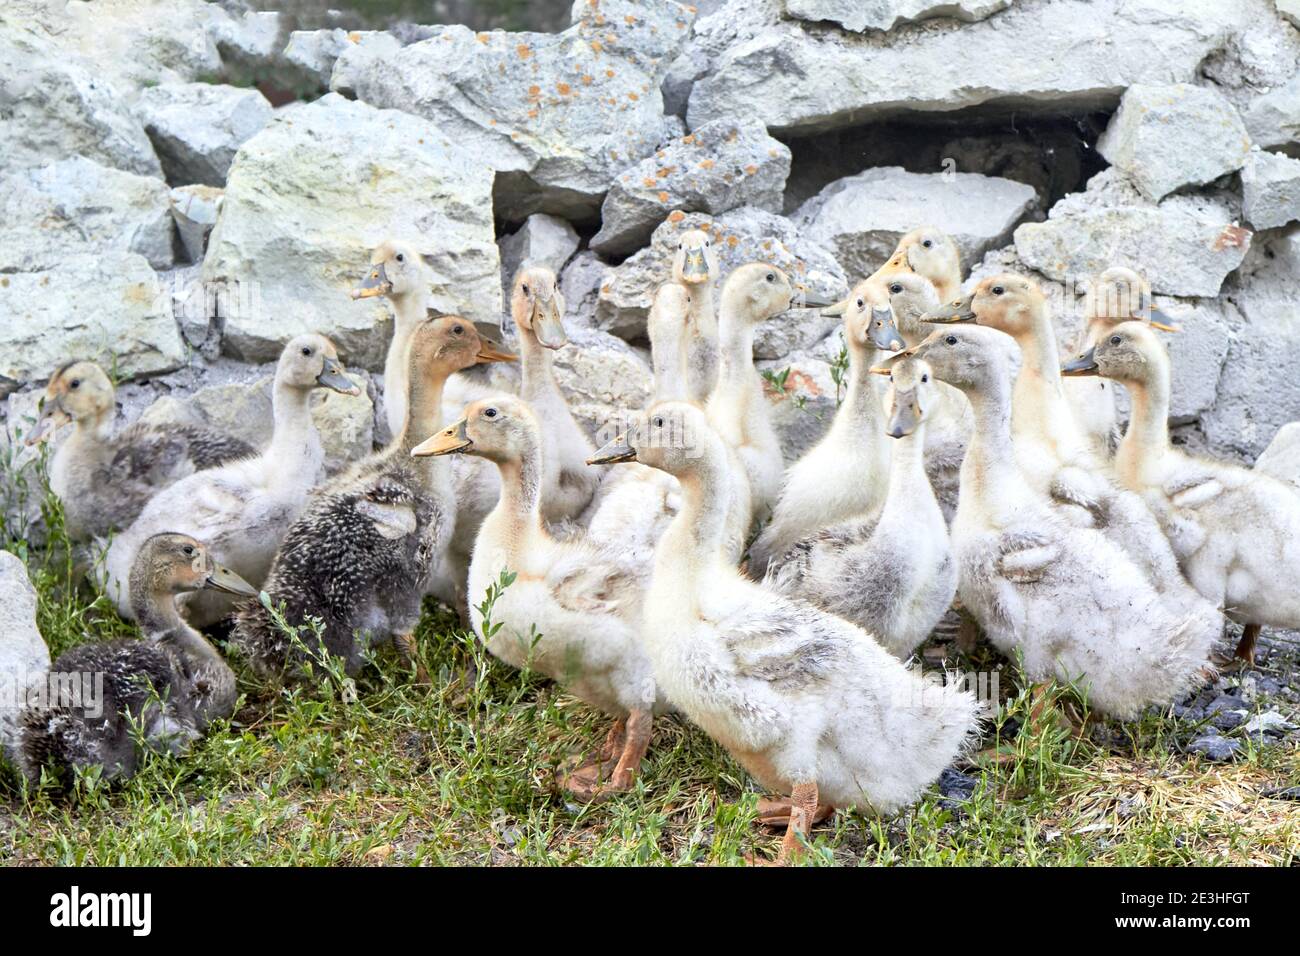 Animal farm theme. A group of yellow and gray domestic ducks with outstretched necks on green grass against a stone fence, raised on a small farm. Stock Photo